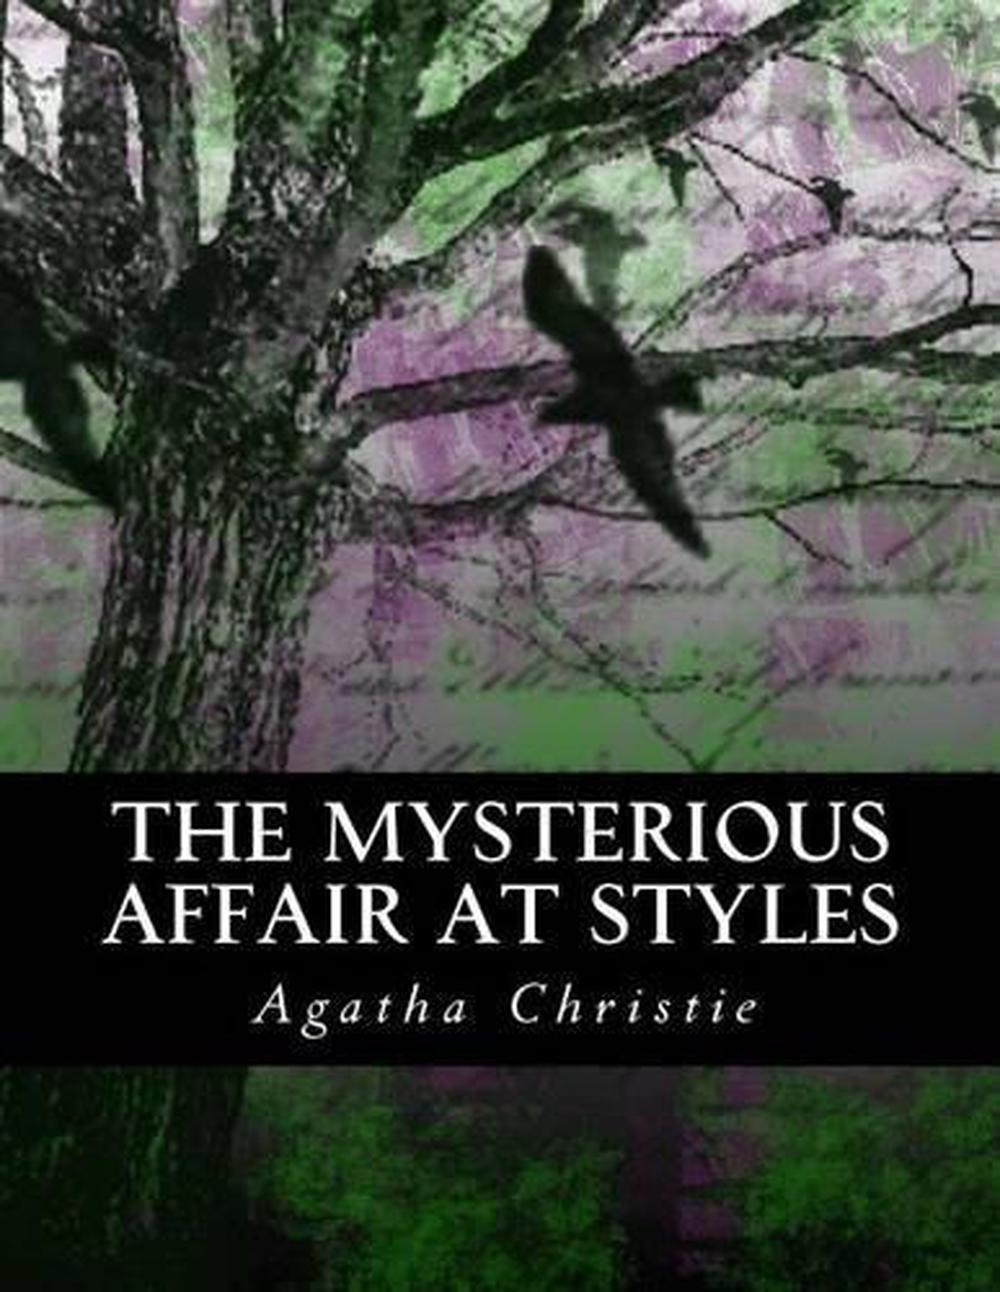 the mysterious affair at styles original book cover